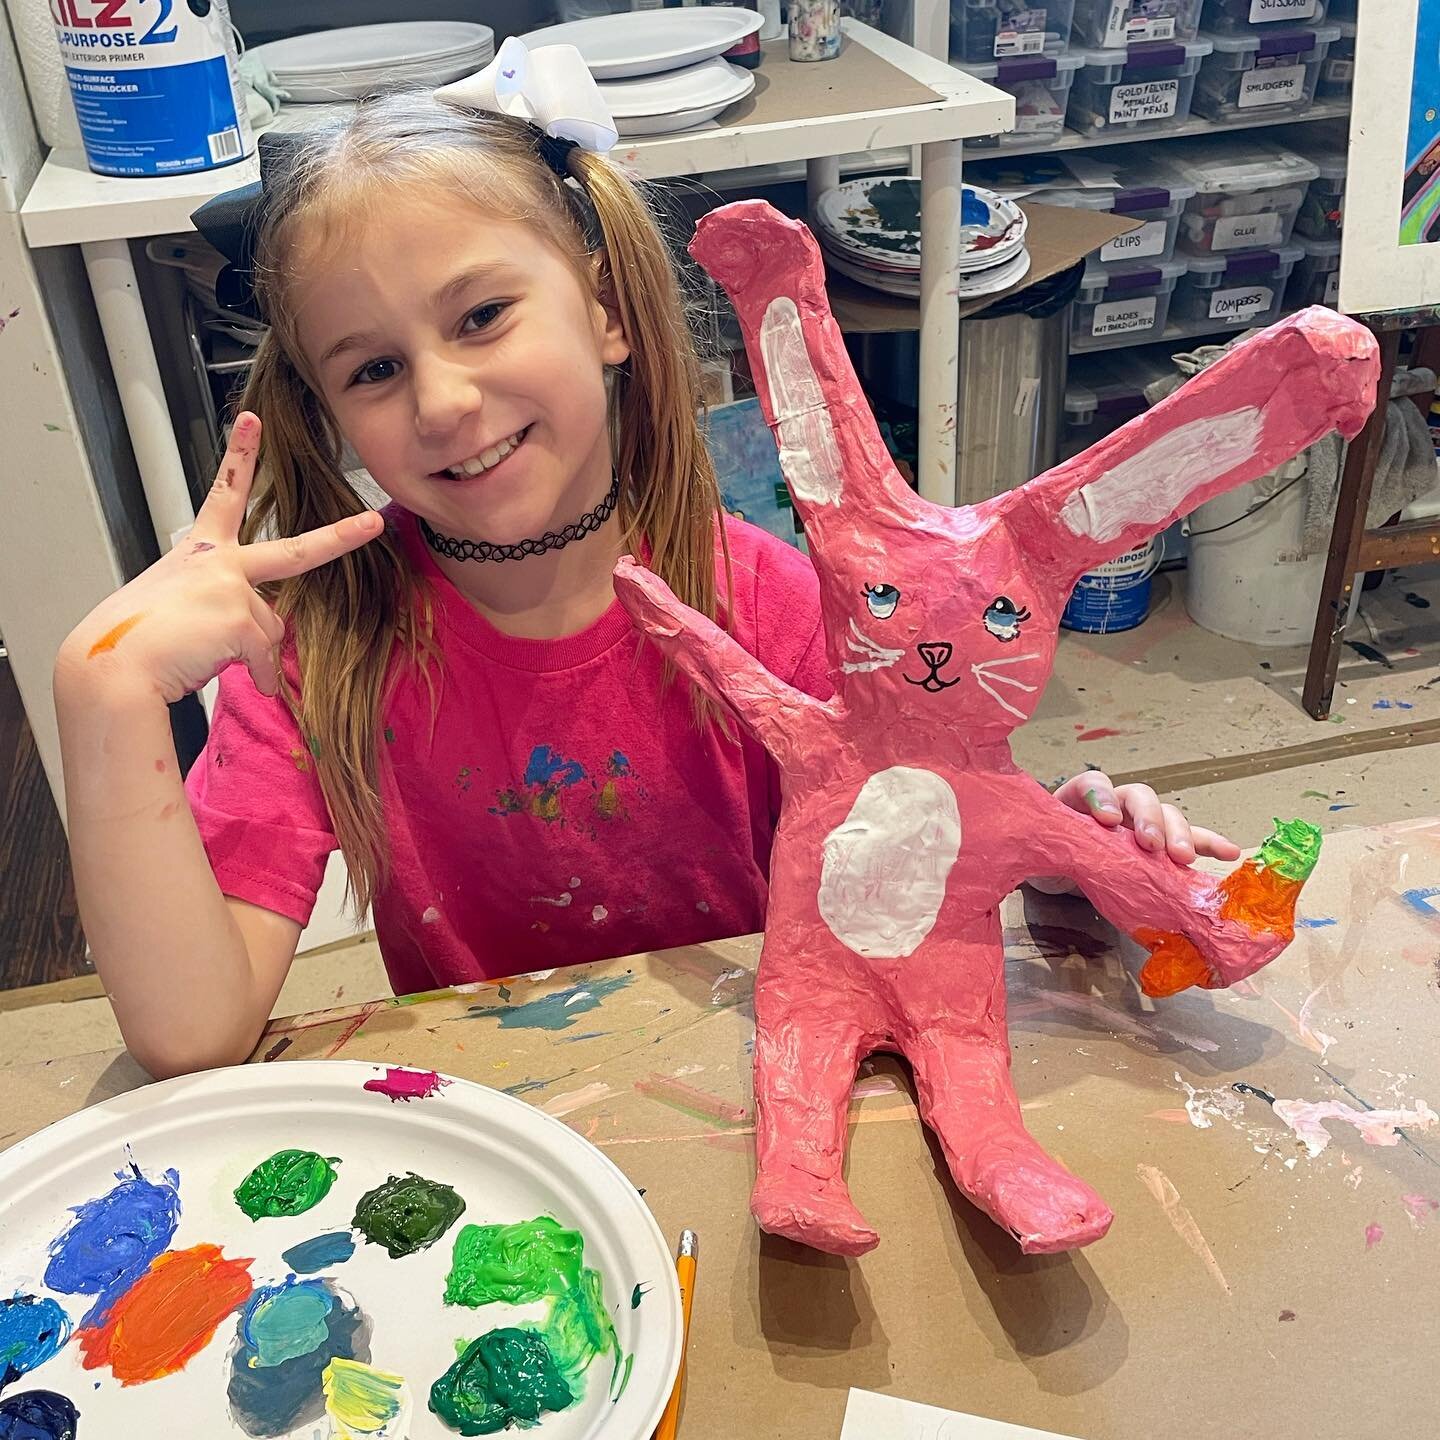 Papier-m&acirc;ch&eacute; all the way! Proud of these budding artists and all their patience and skill #afterschoolart #homeschoolart #artclass